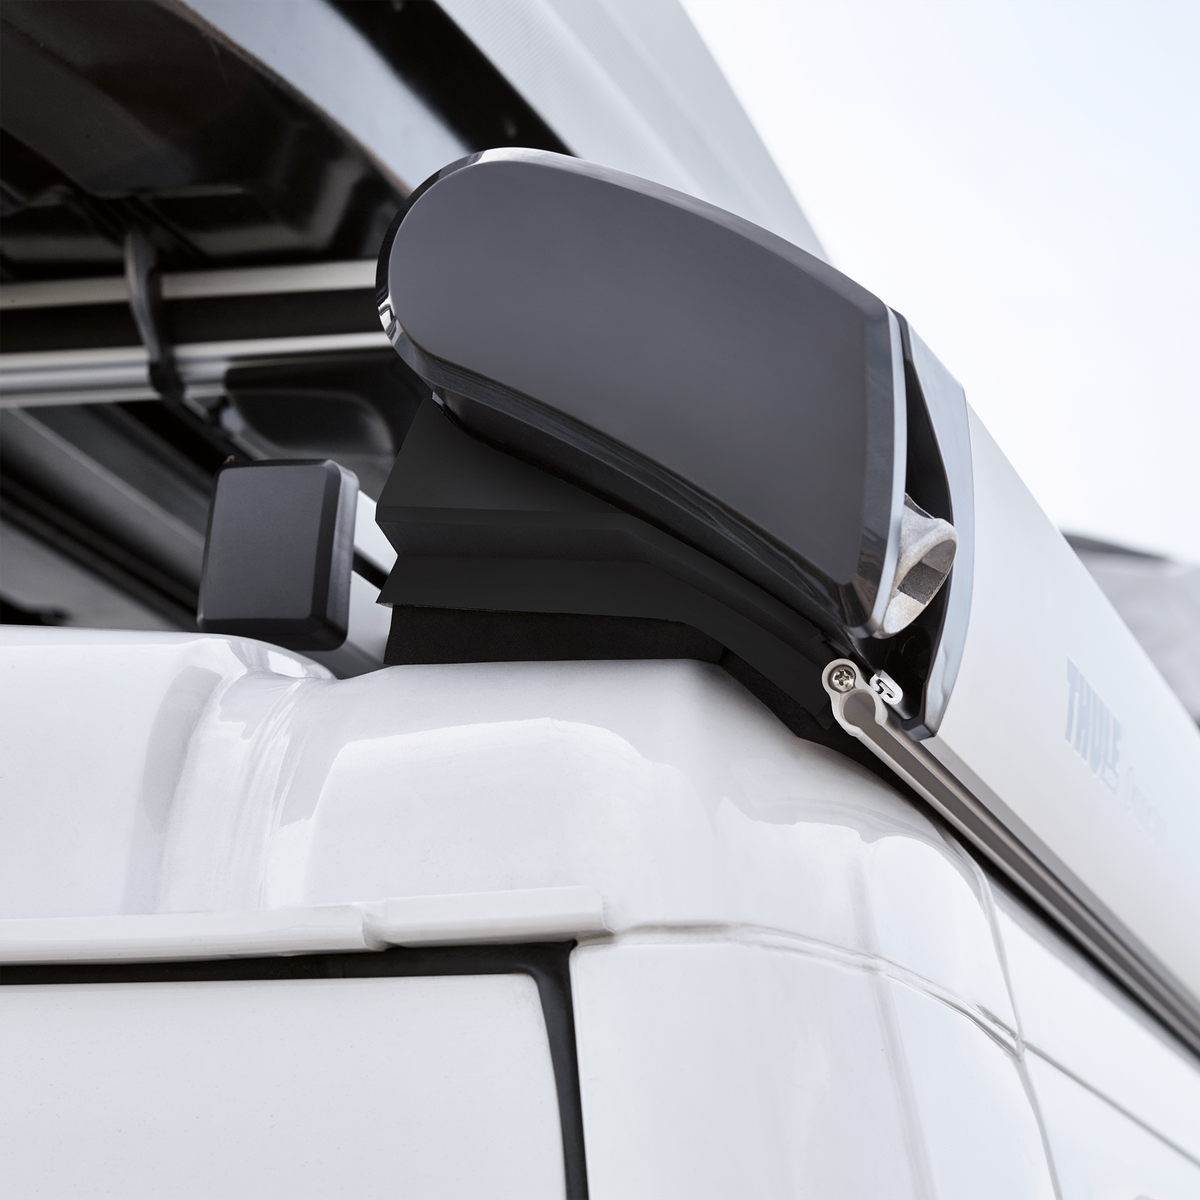 Close up of a Thule SmartClamp System van roof rack on a motorhome.